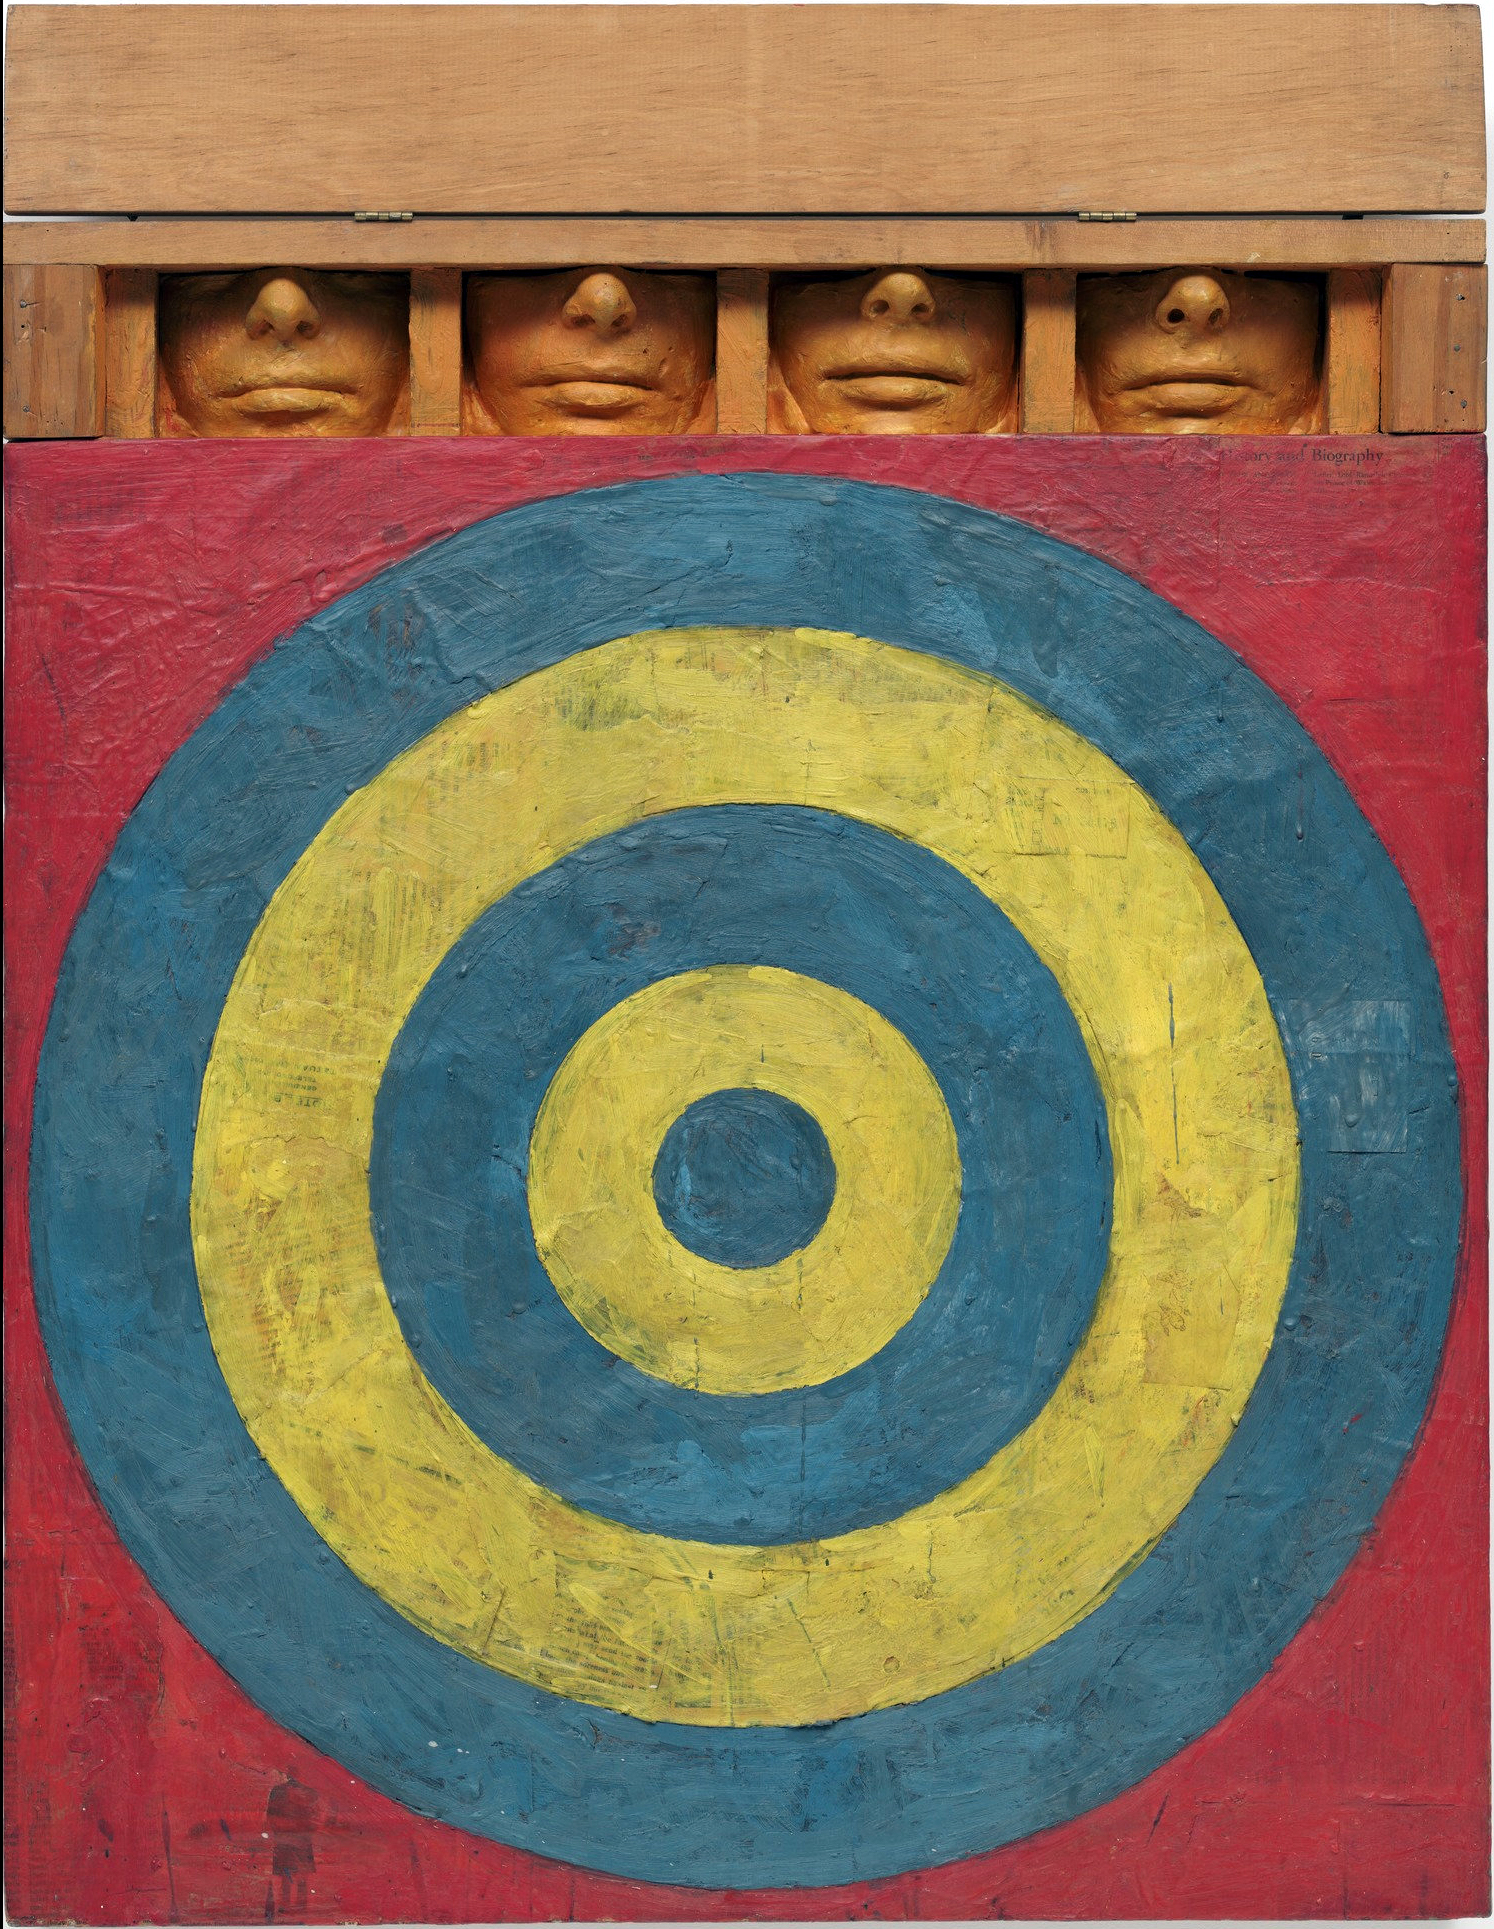 Target with Four Faces (1955) by Jasper Johns. As reproduced in our Phaidon Focus book